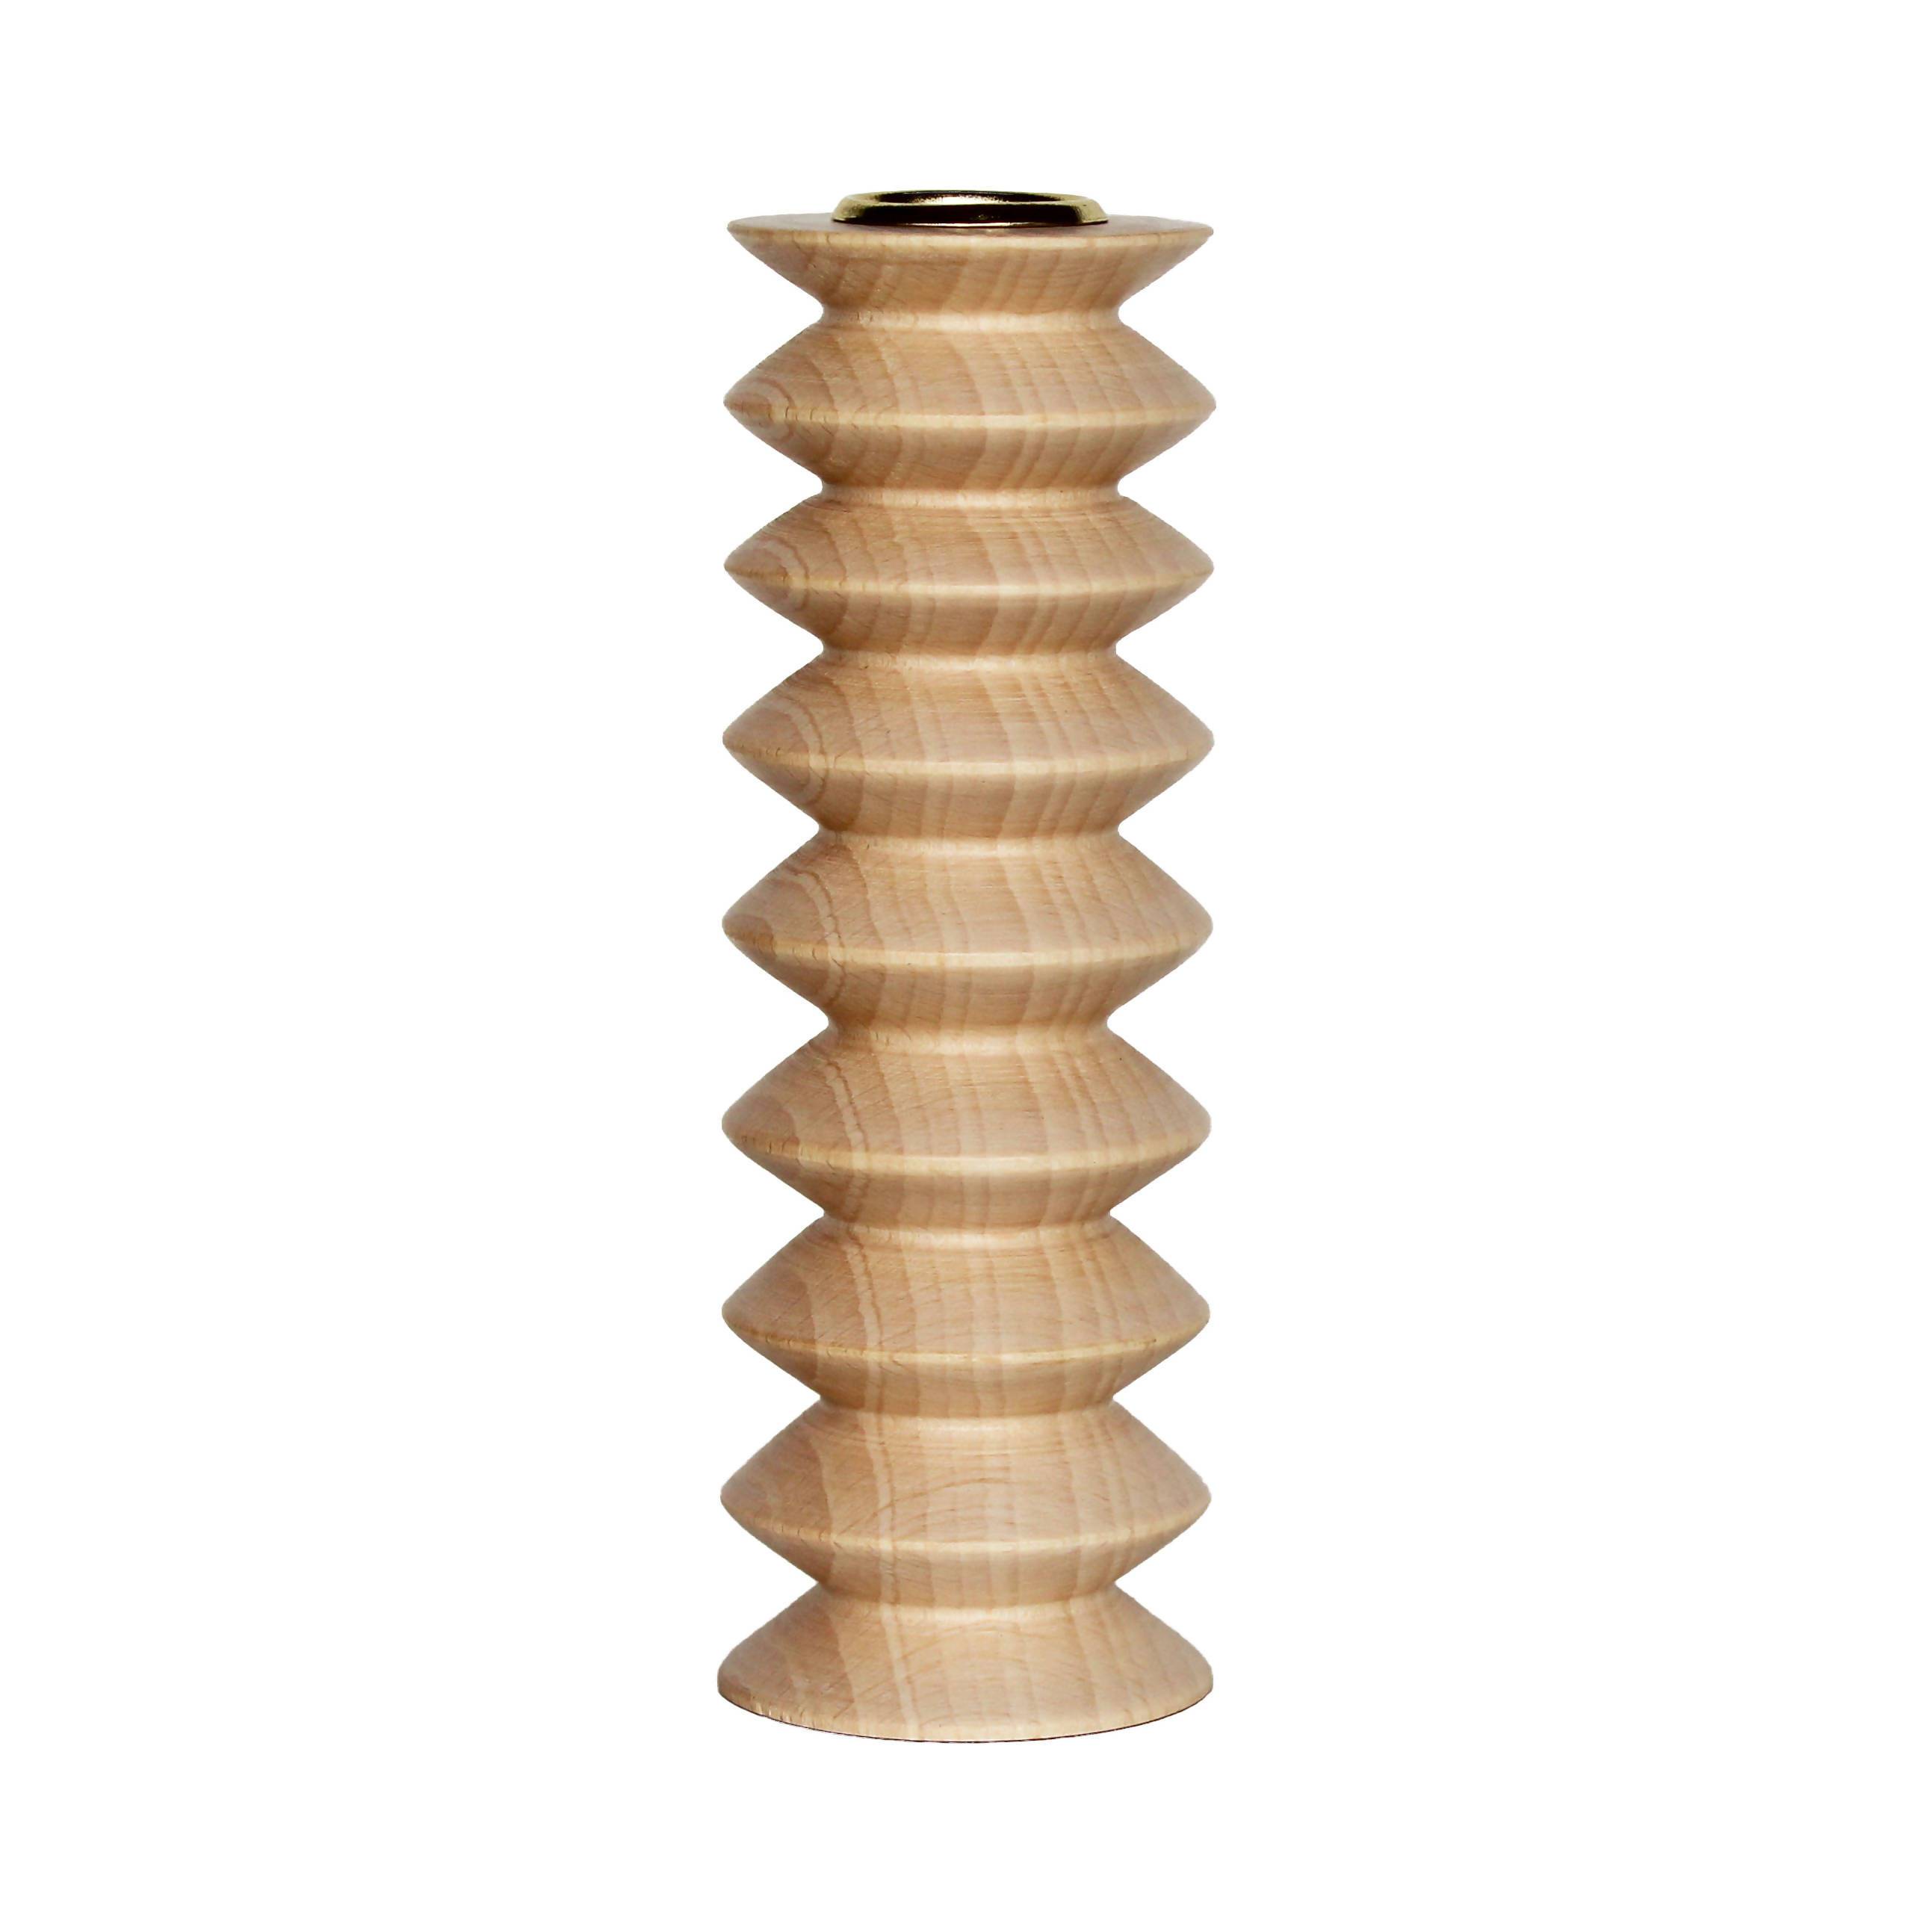 Totem Wooden Candle Holder - Tall Nr. 2 Home Decor 5mm Paper 